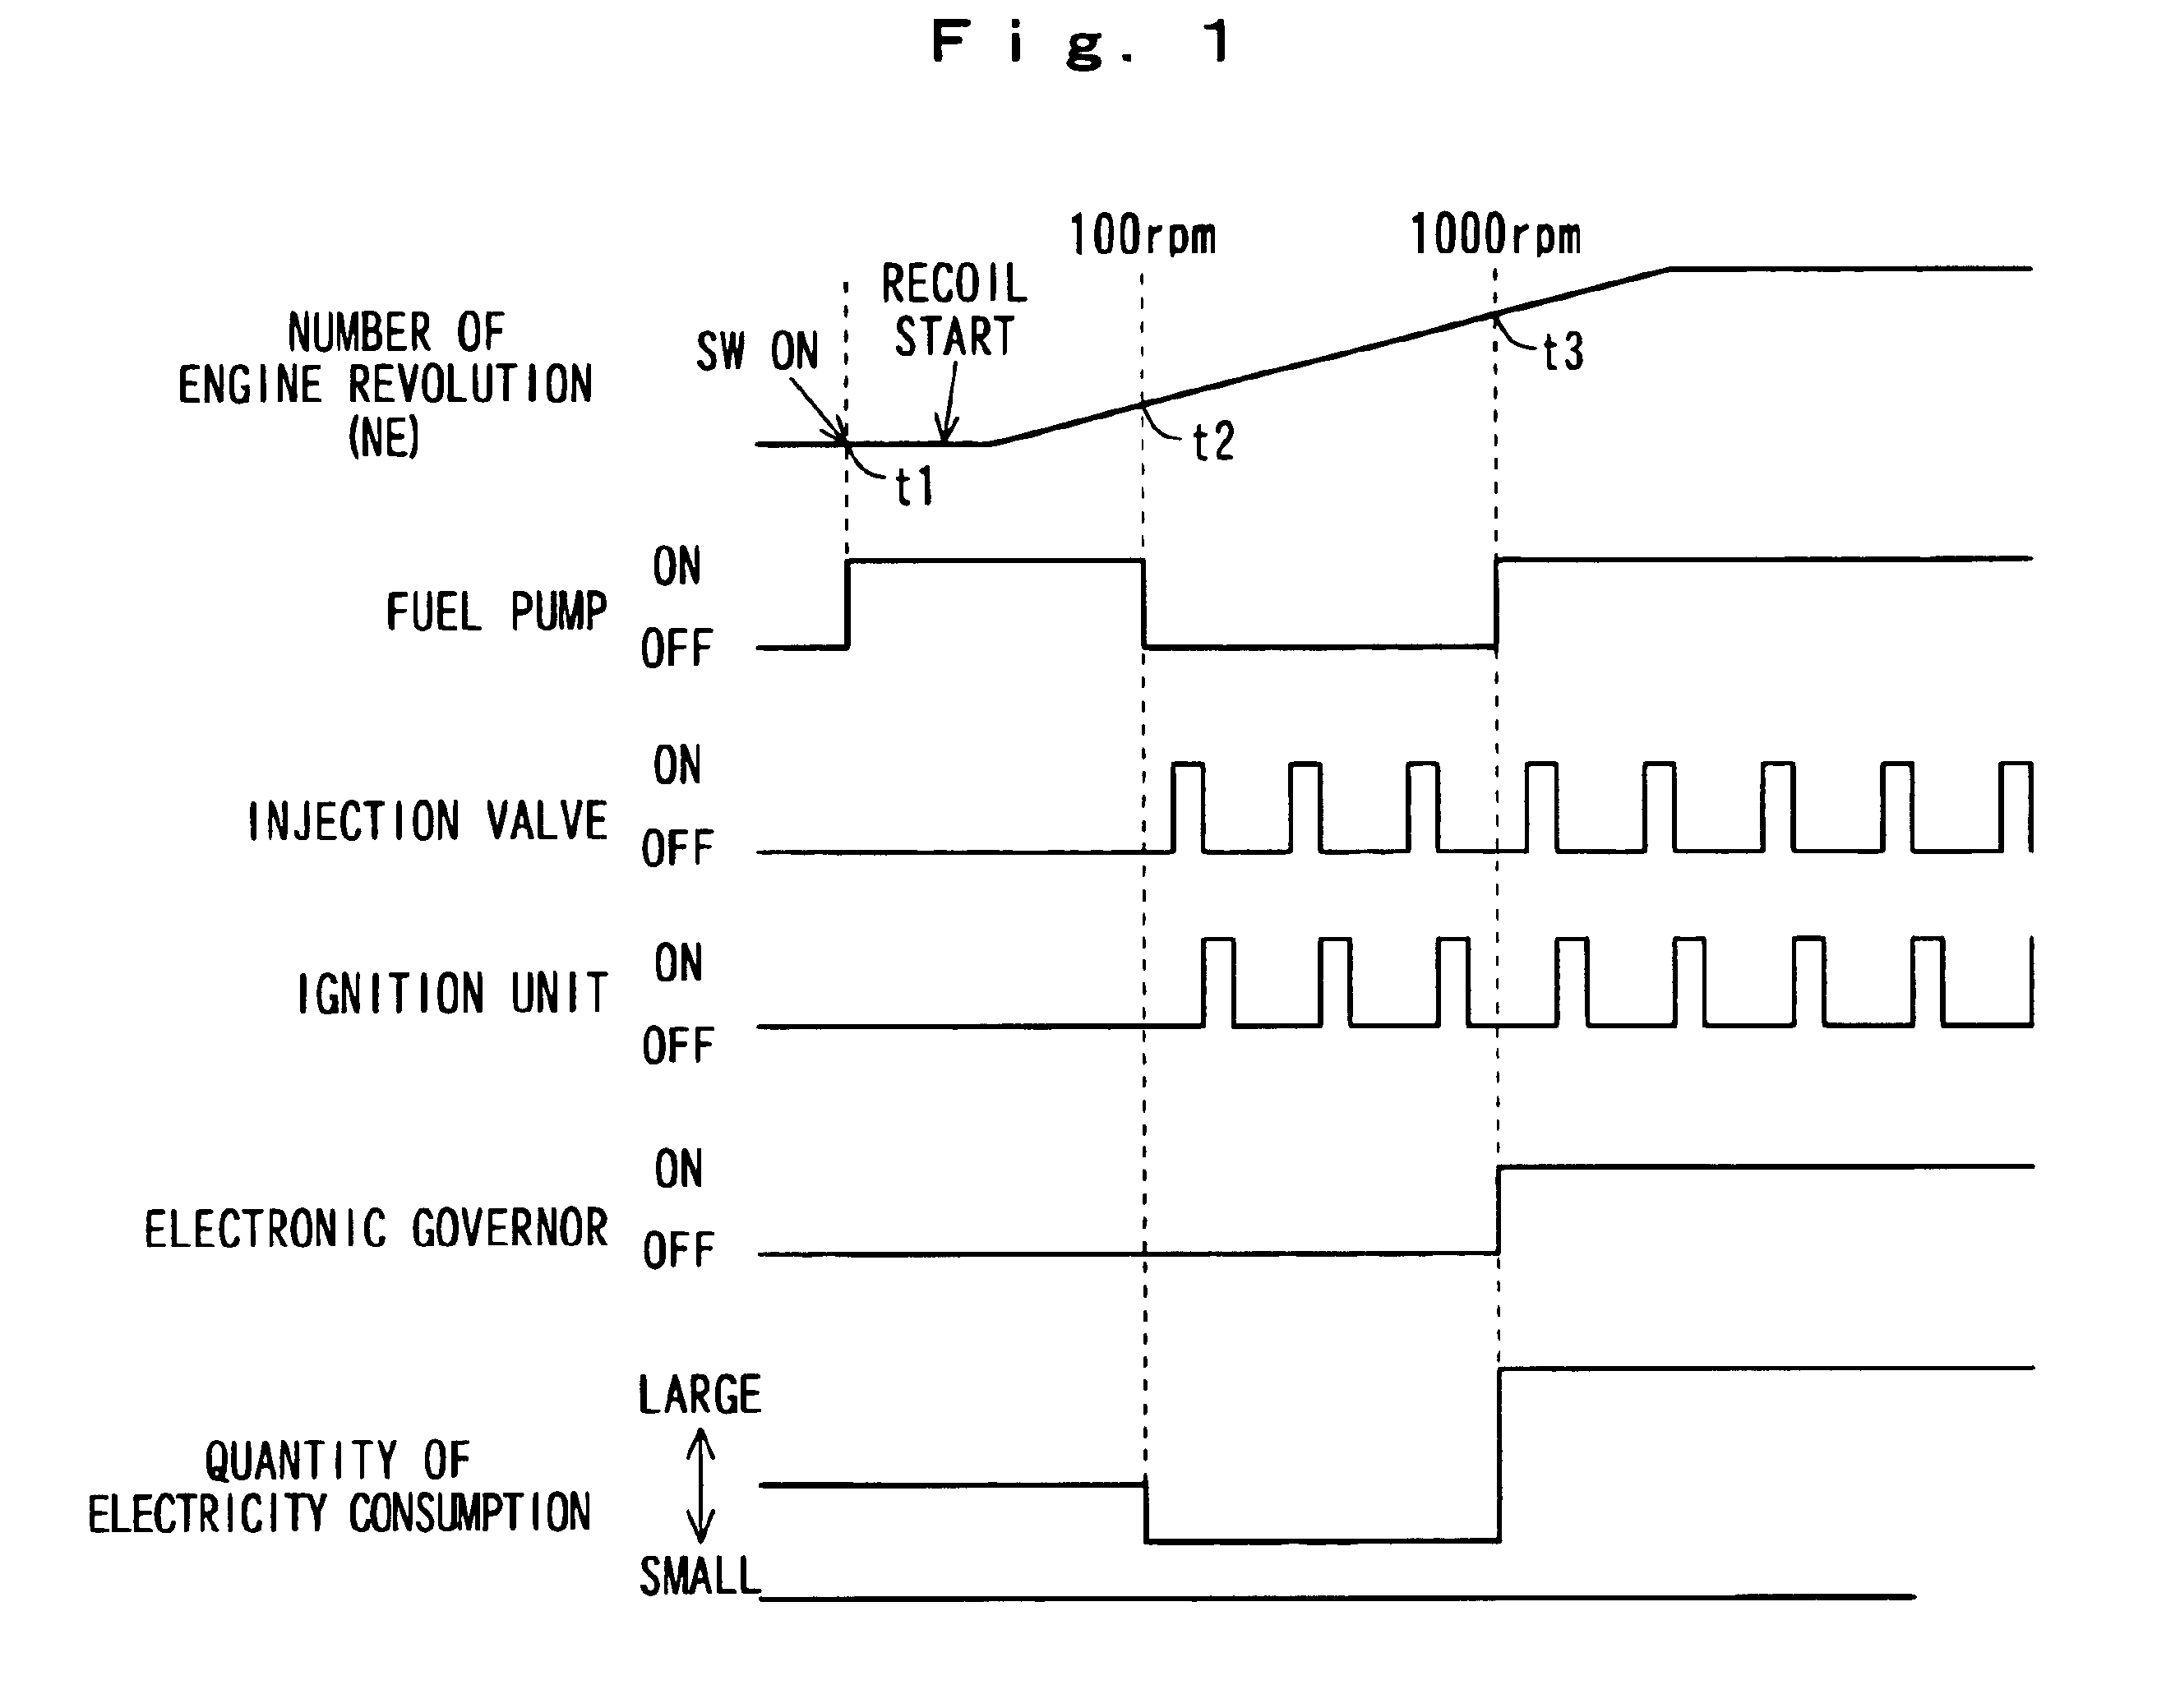 Electronic controlled fuel injection apparatus of internal combustion engine